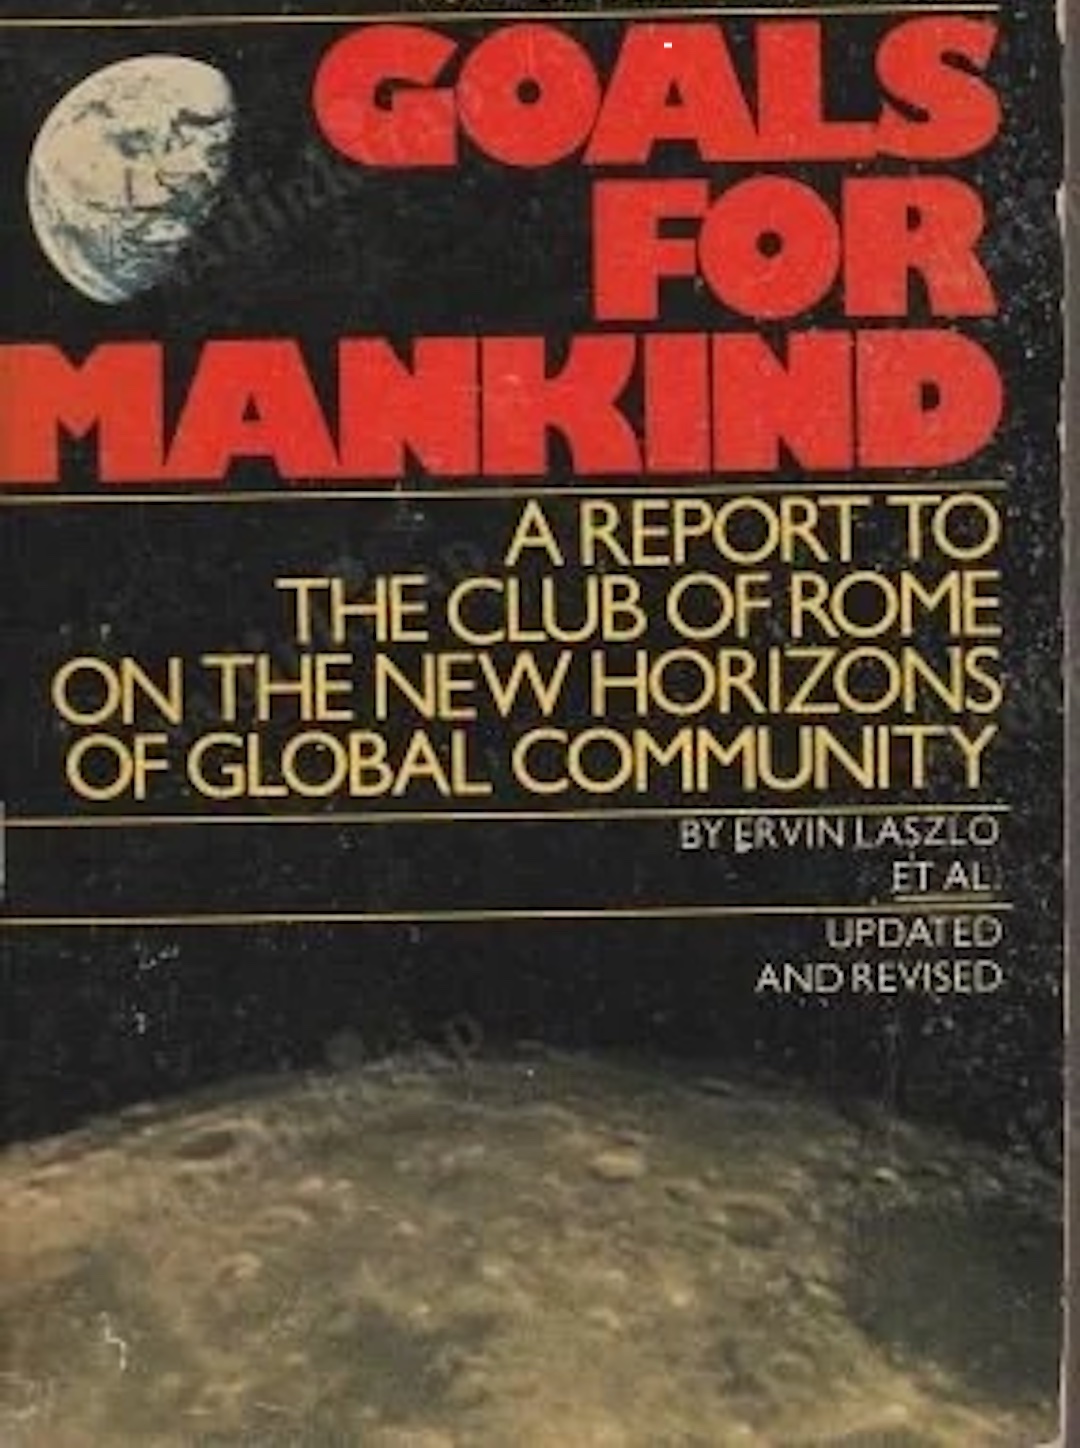 Goals for Mankind - report to the Club of Rome [book cover] (1977).